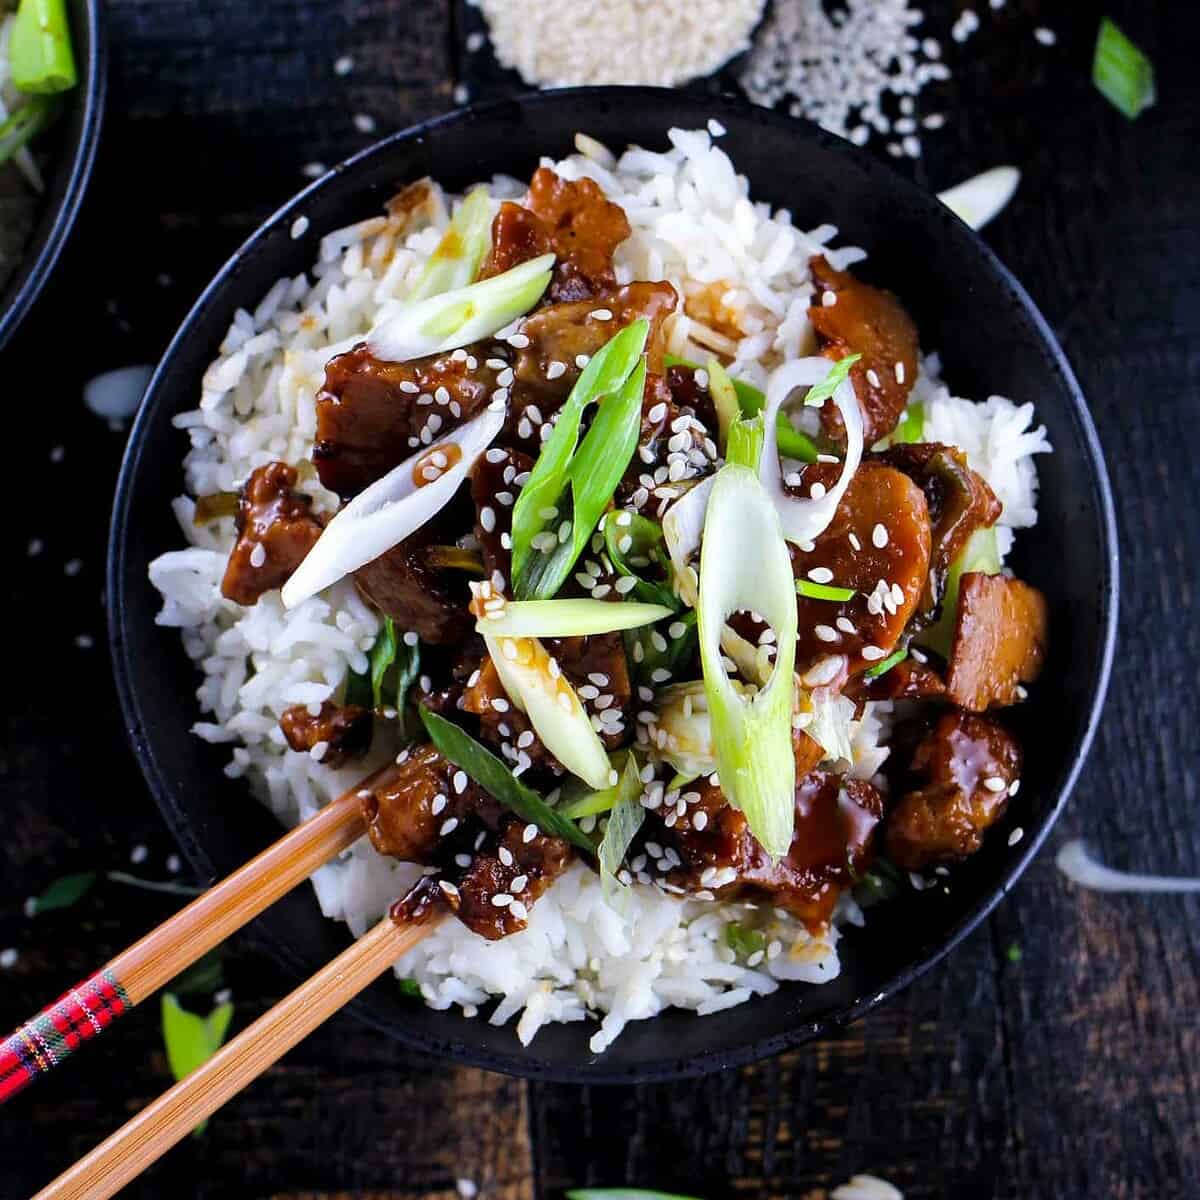  Tofu never tasted so good. Trust us, you won't miss the meat in this dish.